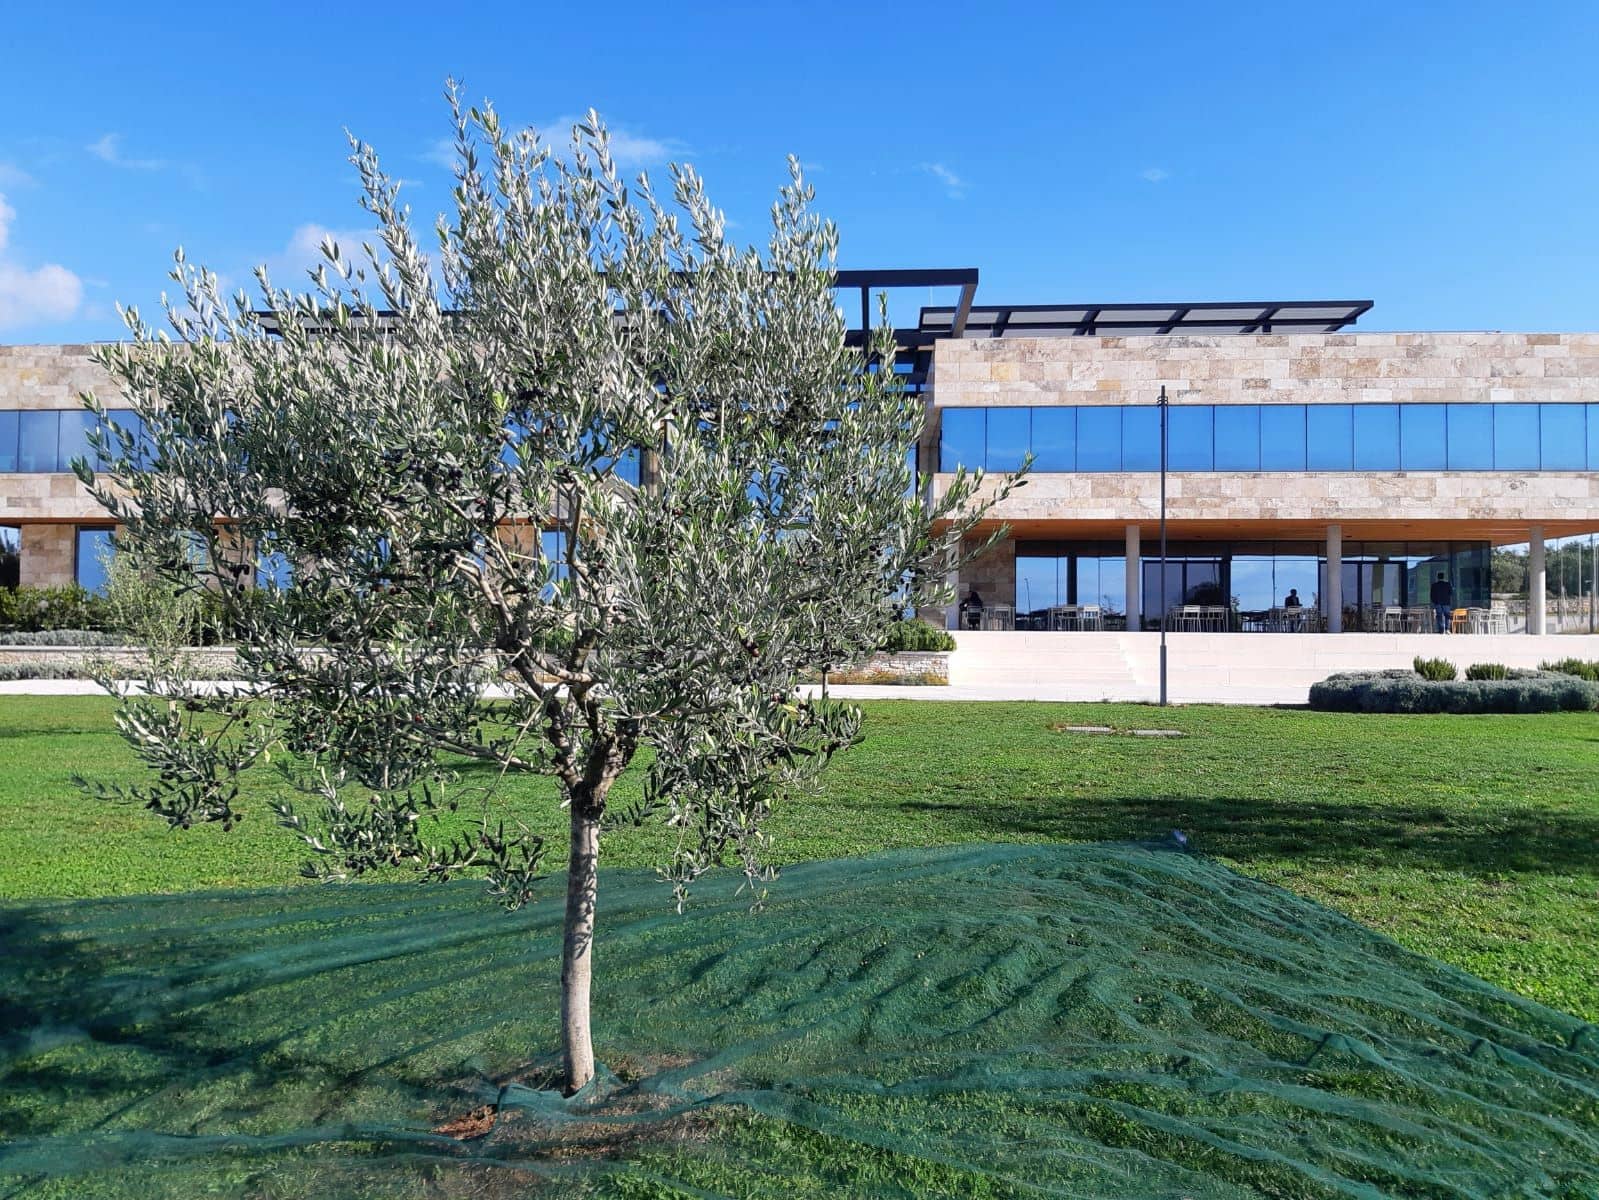 europe-production-business-croatian-tech-company-produces-awardwinning-evoo-for-gifting-olive-oil-times